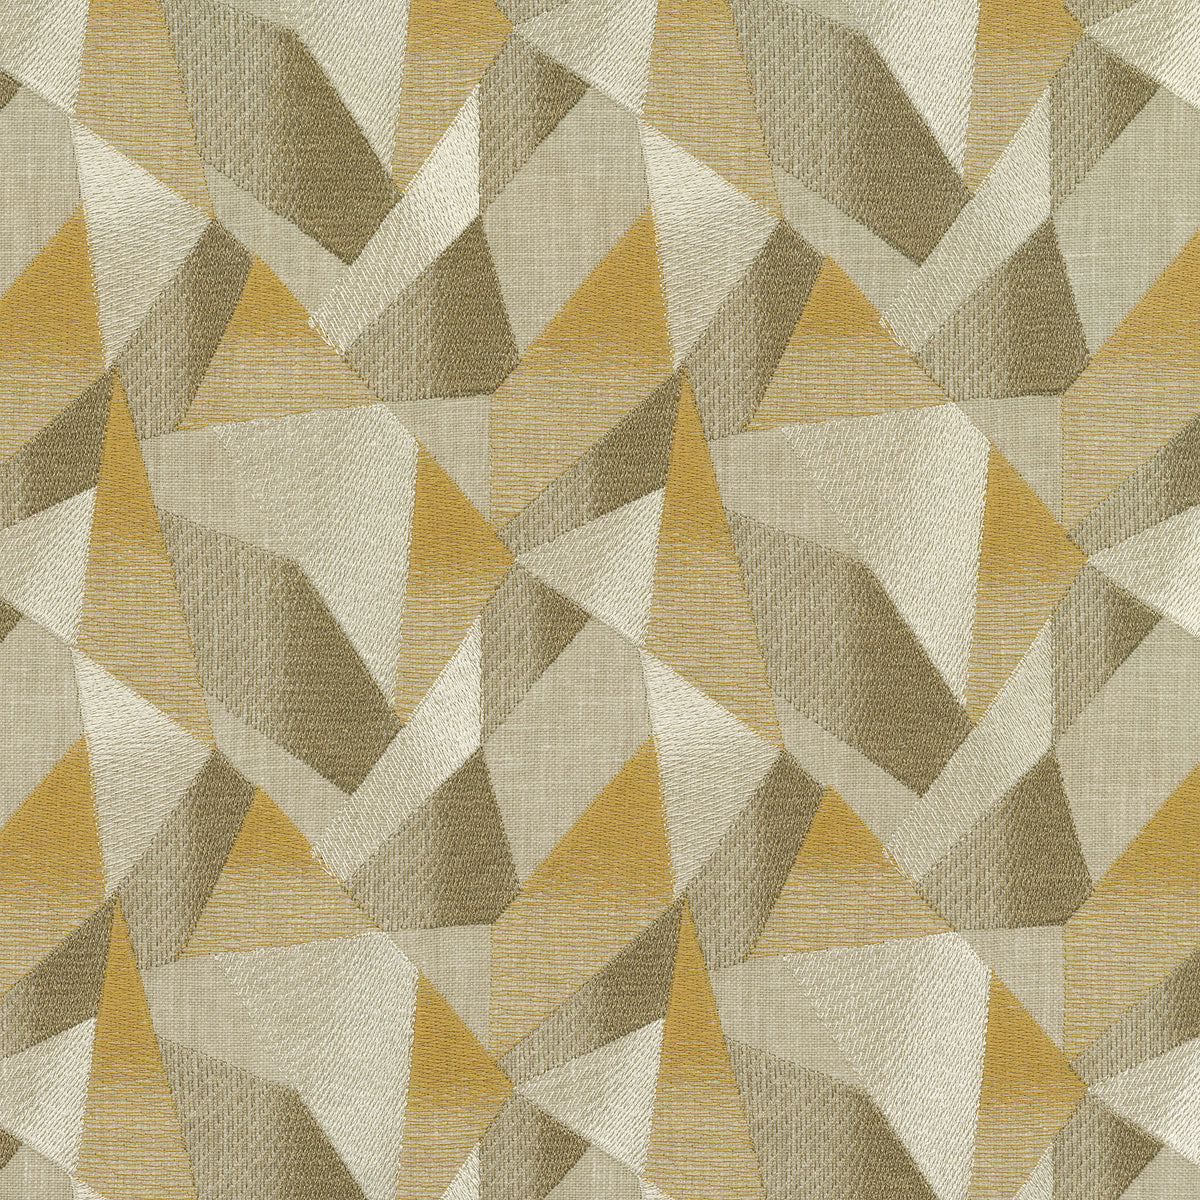 P/K Lifestyles Prism Embroidery - Gold 411441 Fabric Swatch